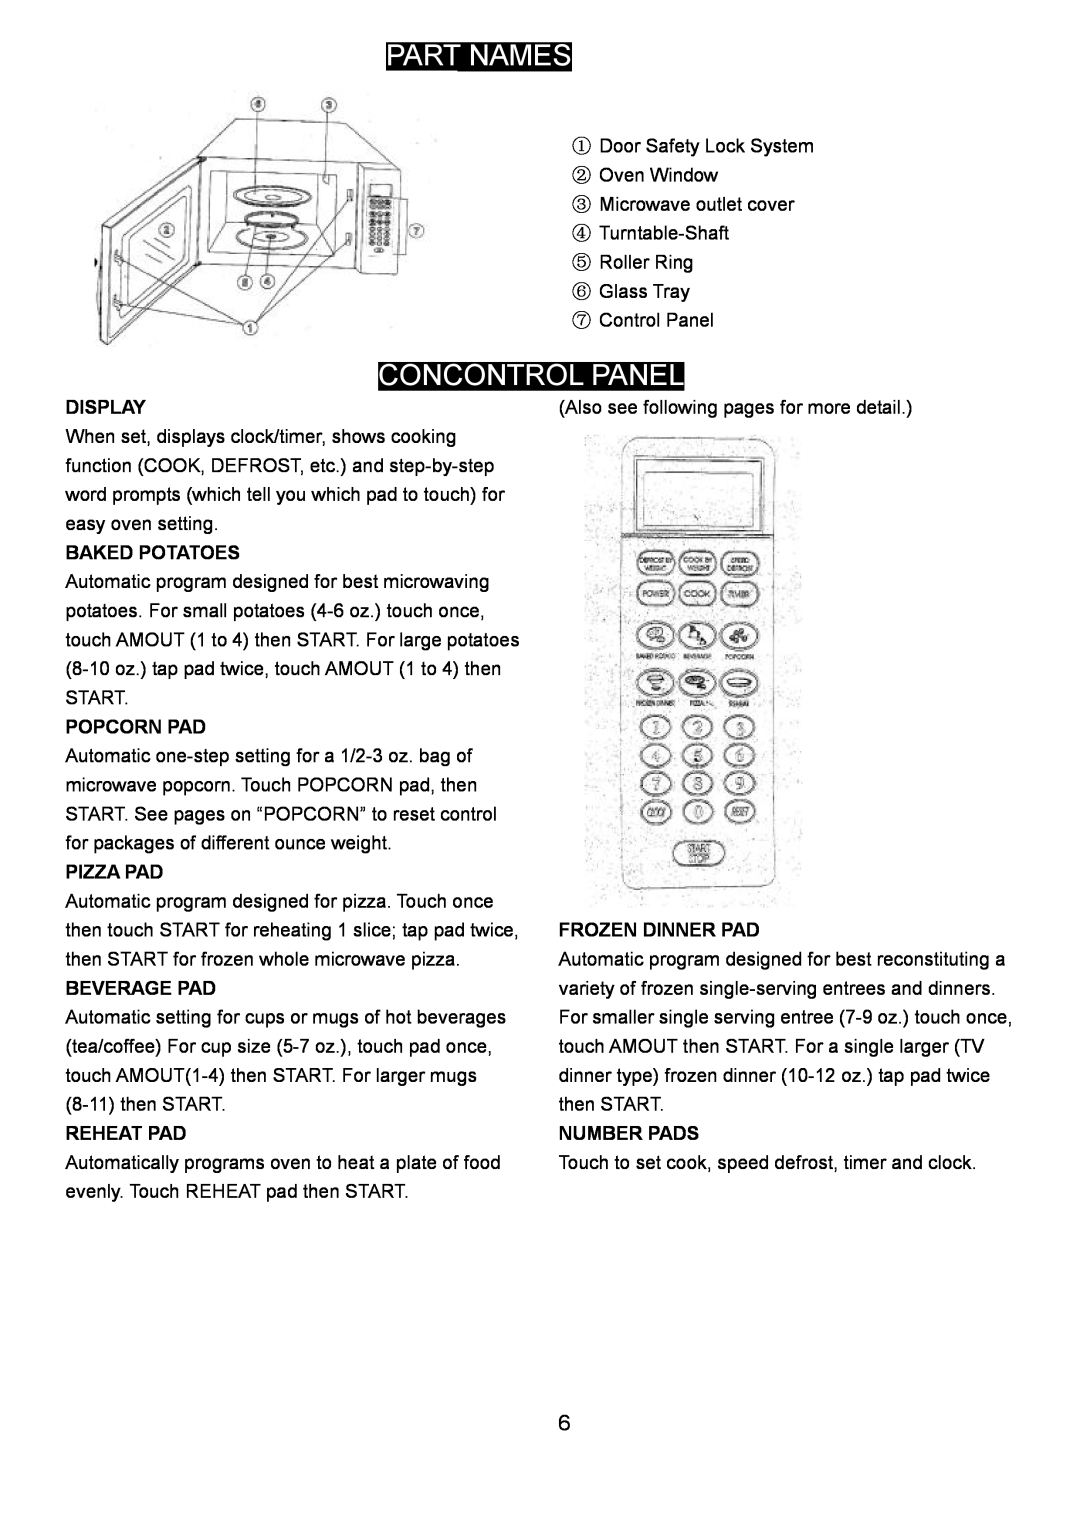 Danby DMW1147SS owner manual Part Names, Concontrol Panel 